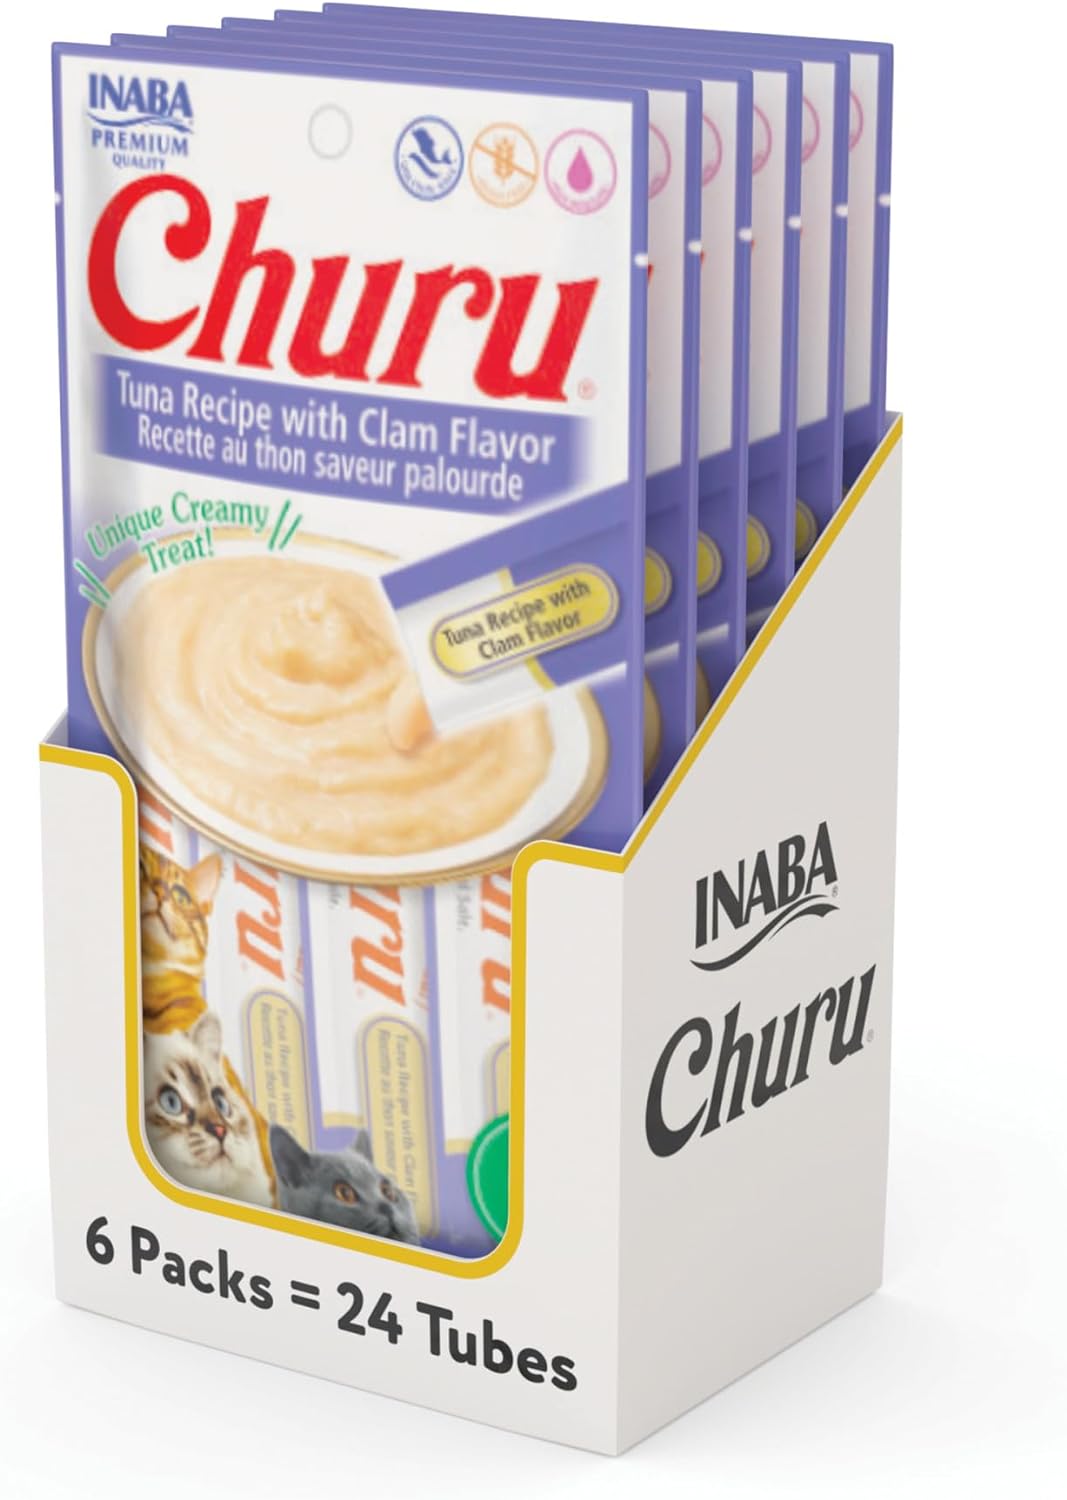 INABA Churu Cat Treats, Grain-Free, Lickable, Squeezable Creamy Purée Cat Treat/Topper with Vitamin E & Taurine, 0.5 Ounces Each Tube, 24 Tubes (4 per Pack), Tuna Recipe with Clam Flavor